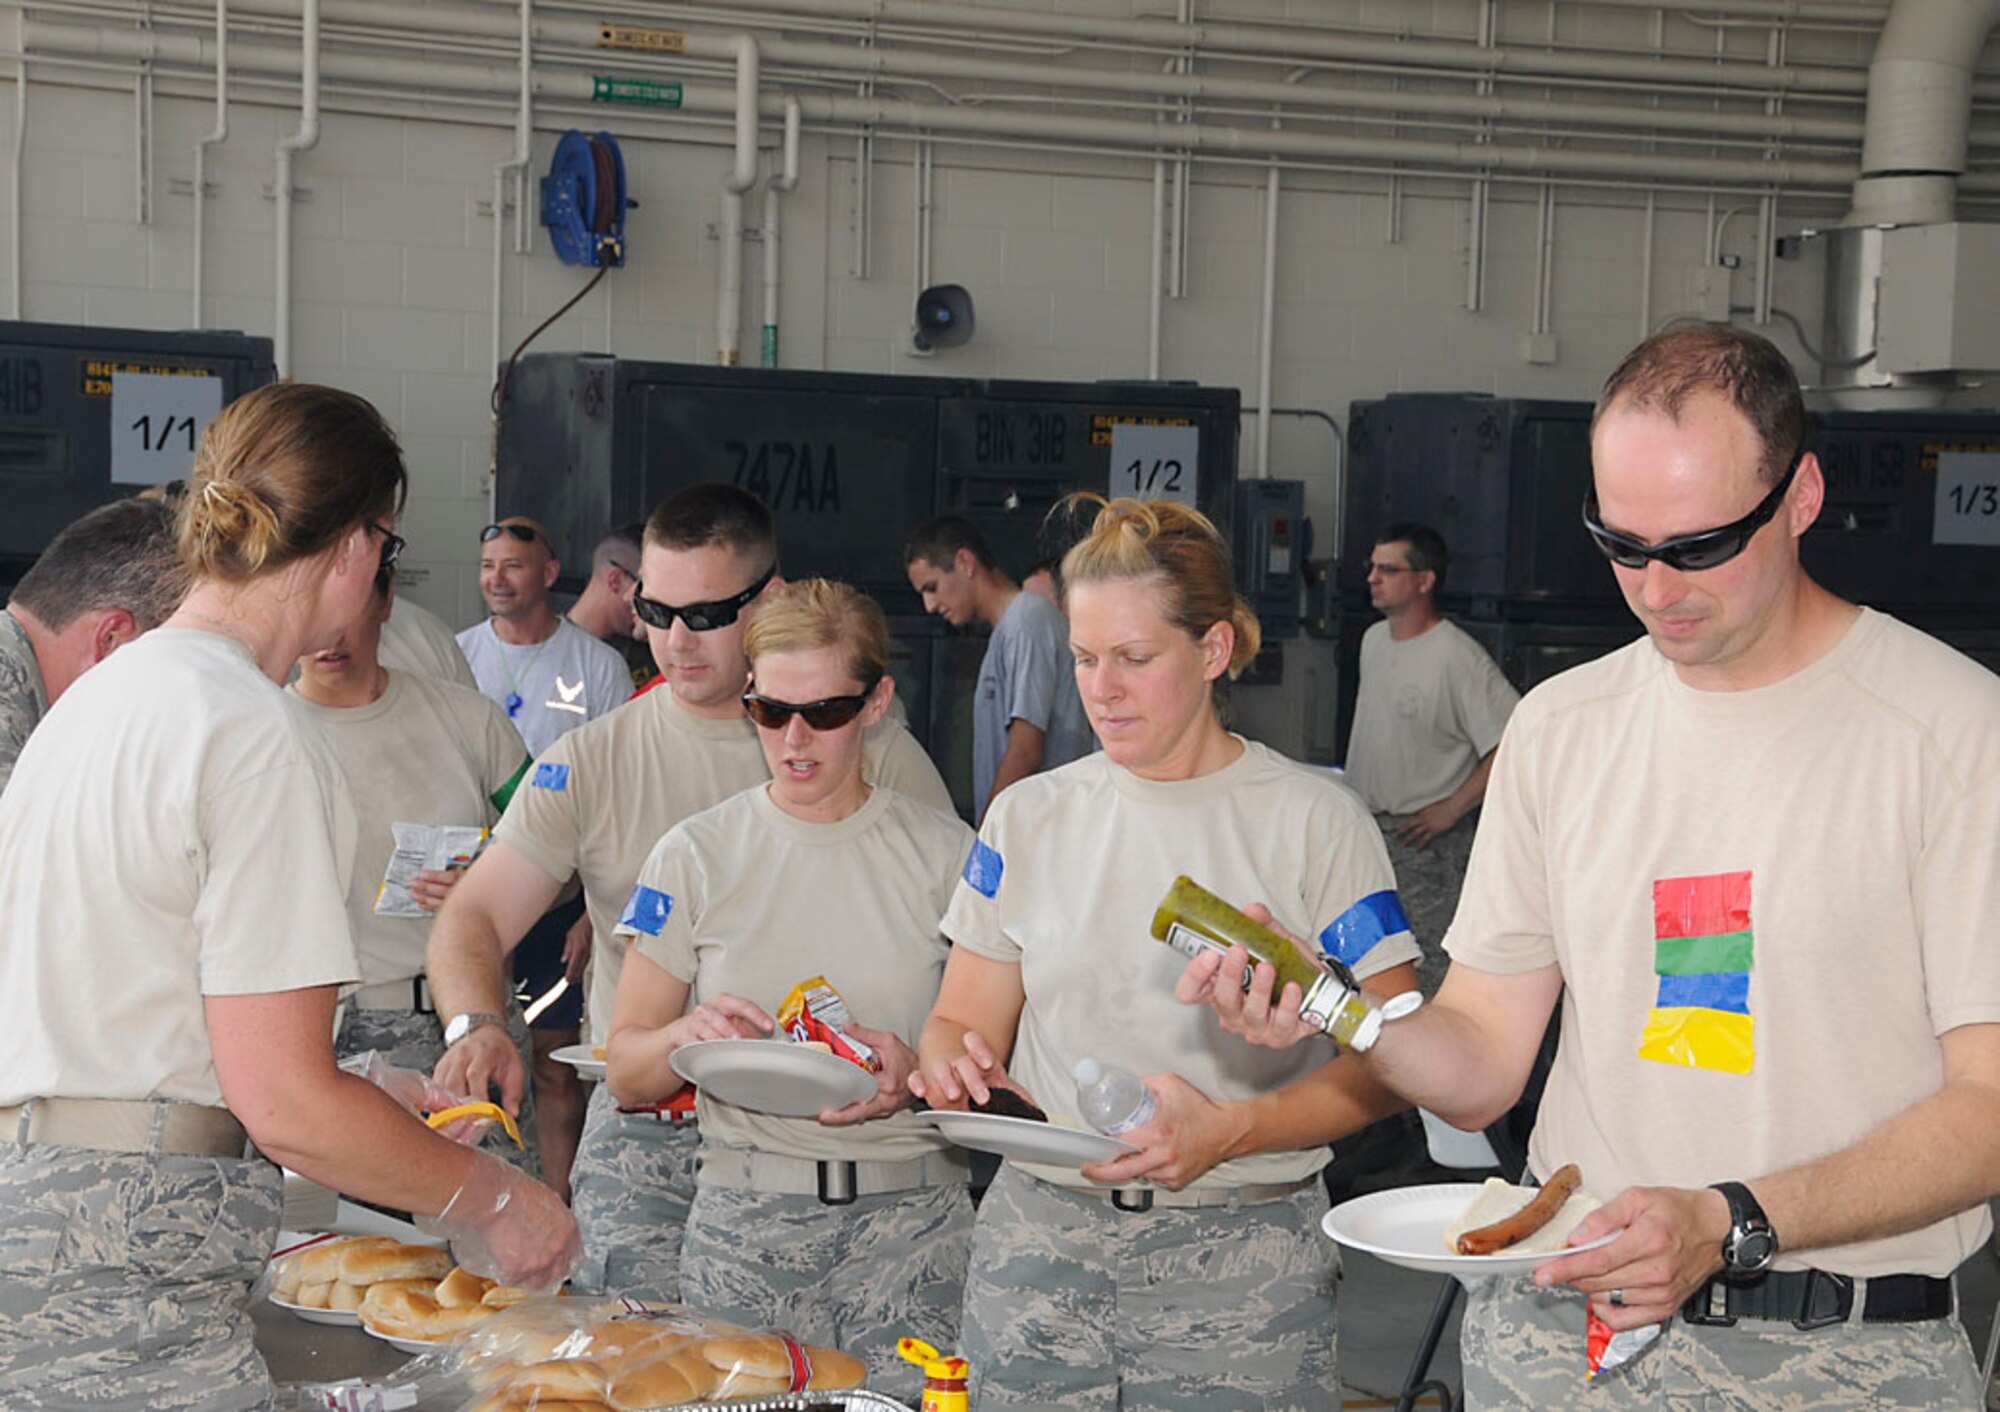 Security Forces Squadron participants, Staff Sgt. Brandon Criss, Tech. Sgt. Amber VanNess, Tech. Sgt. Jamie Renehan, and Staff Sgt. Rick Tryon (who appears to be neutral) flow through the chow line after working up an appetite on the battle field. Photo by Master Sgt. John M.  Day/Released